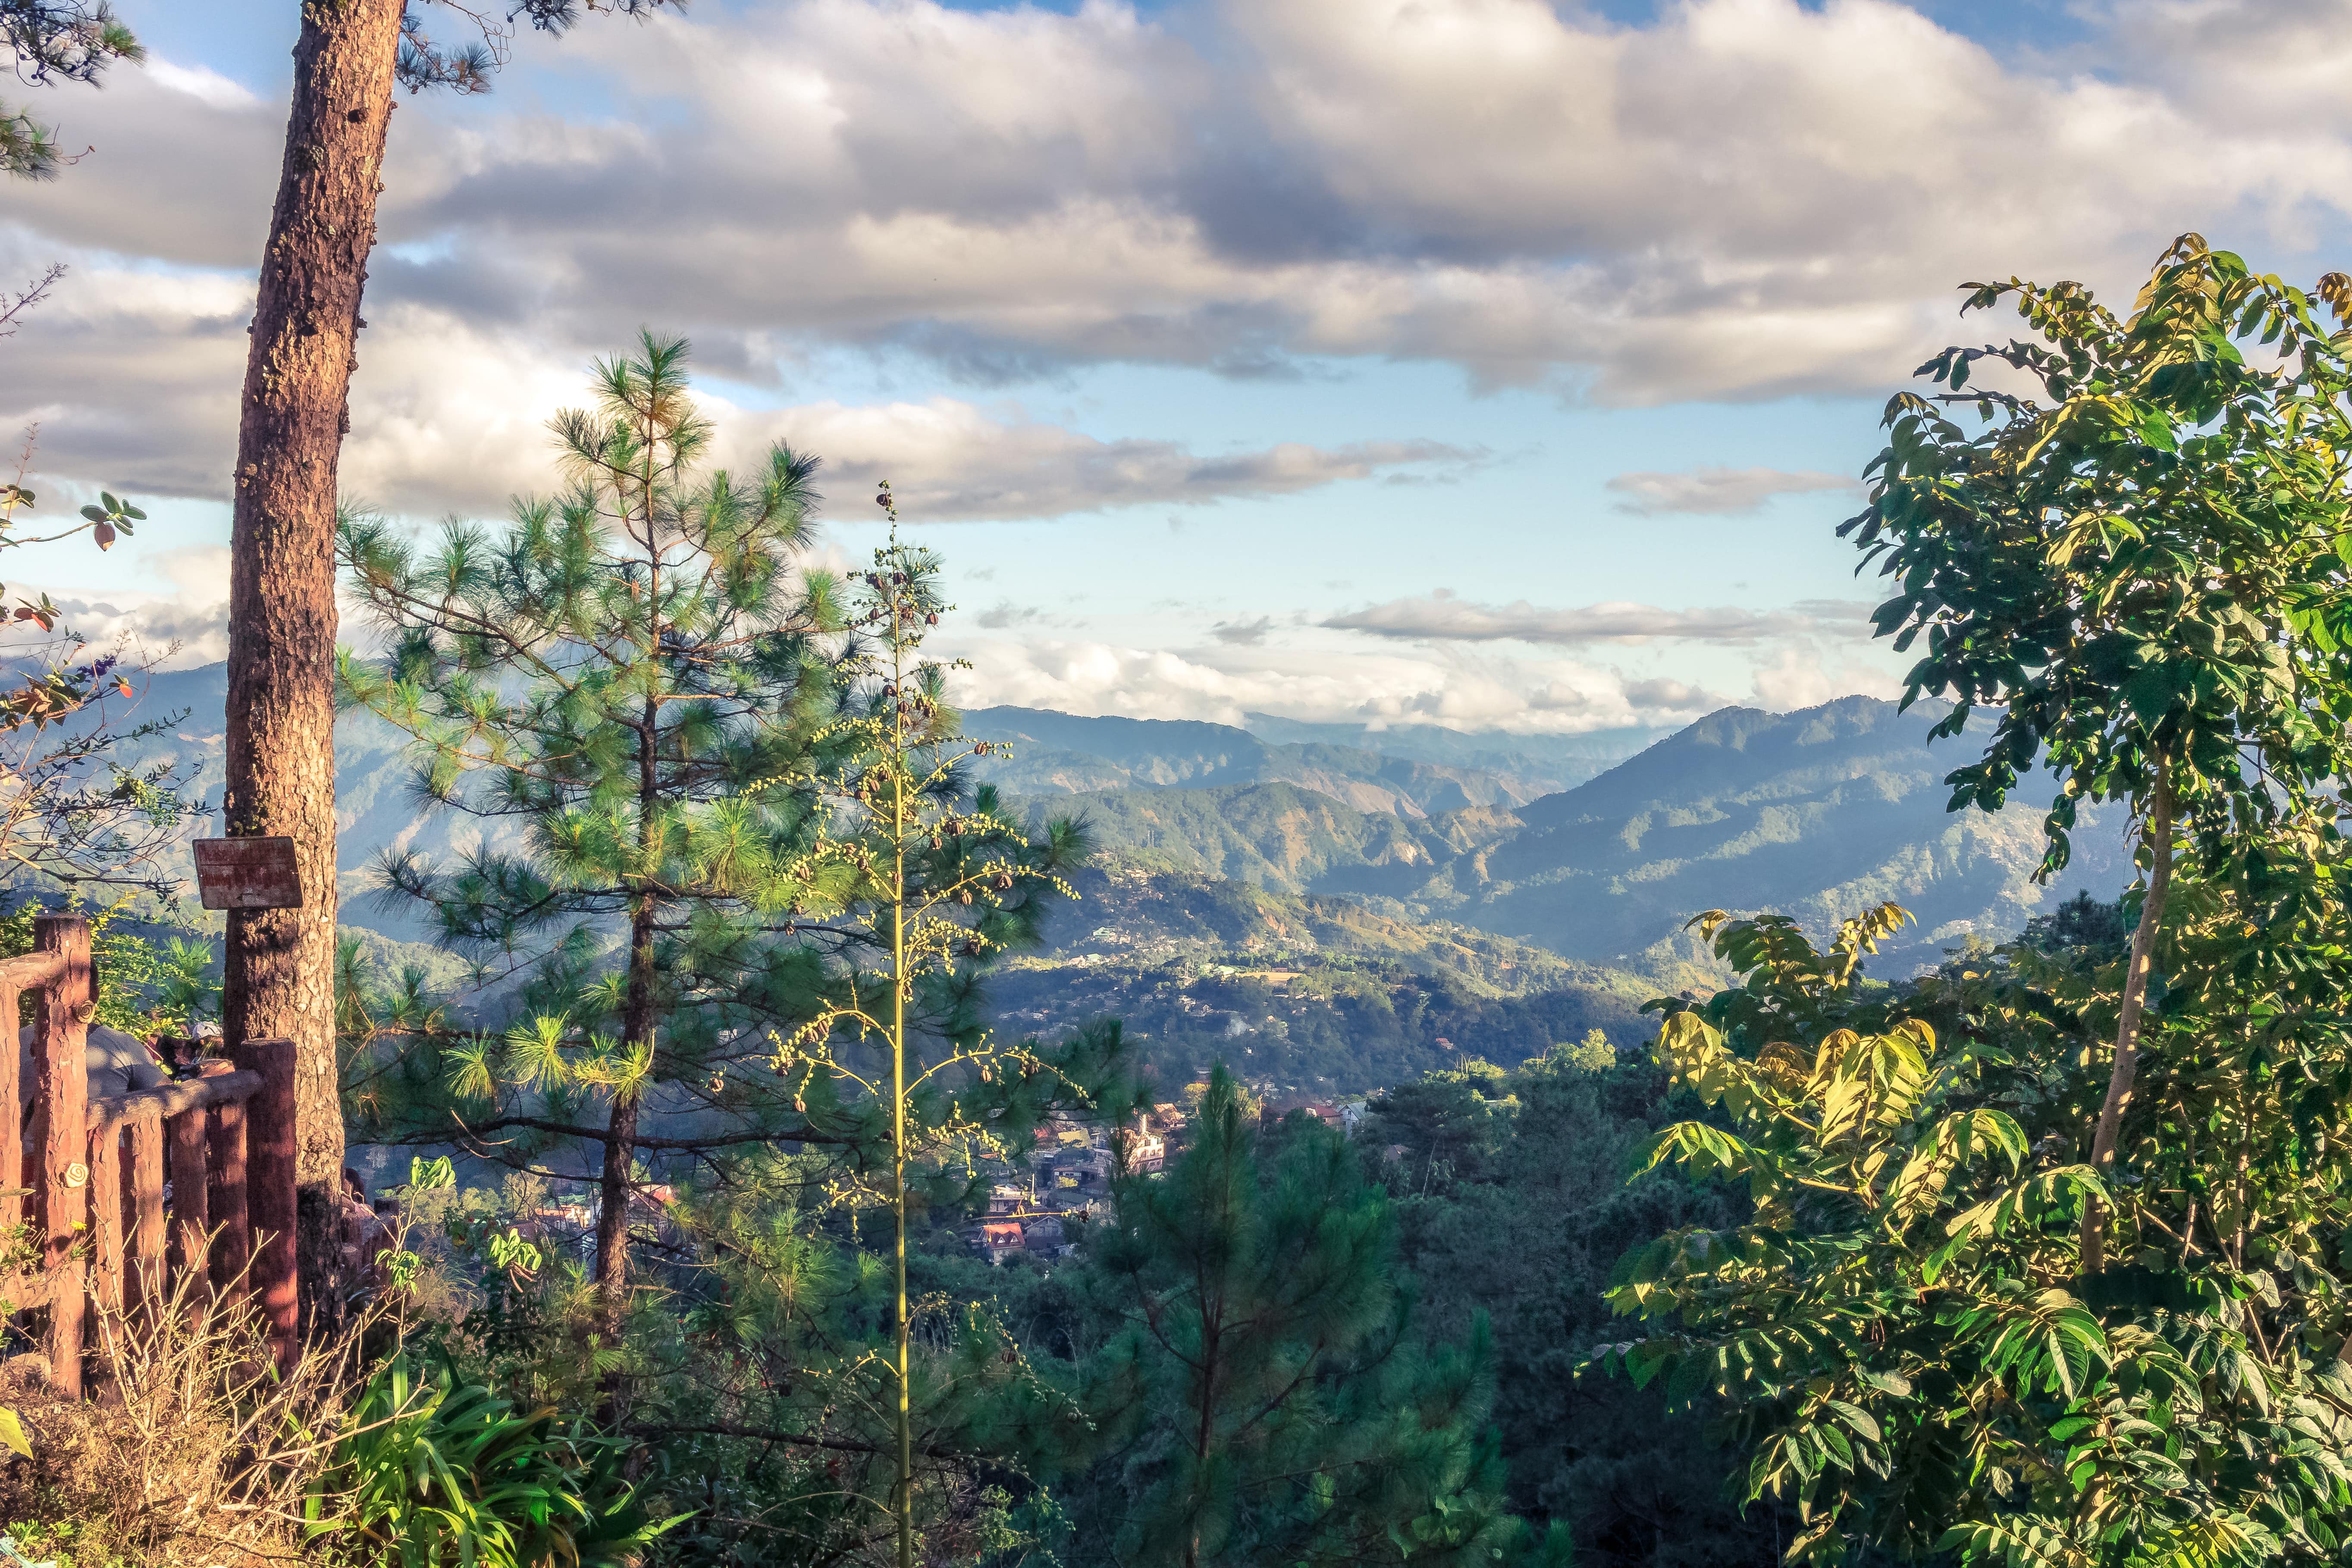 View of Mines View Park from Baguio